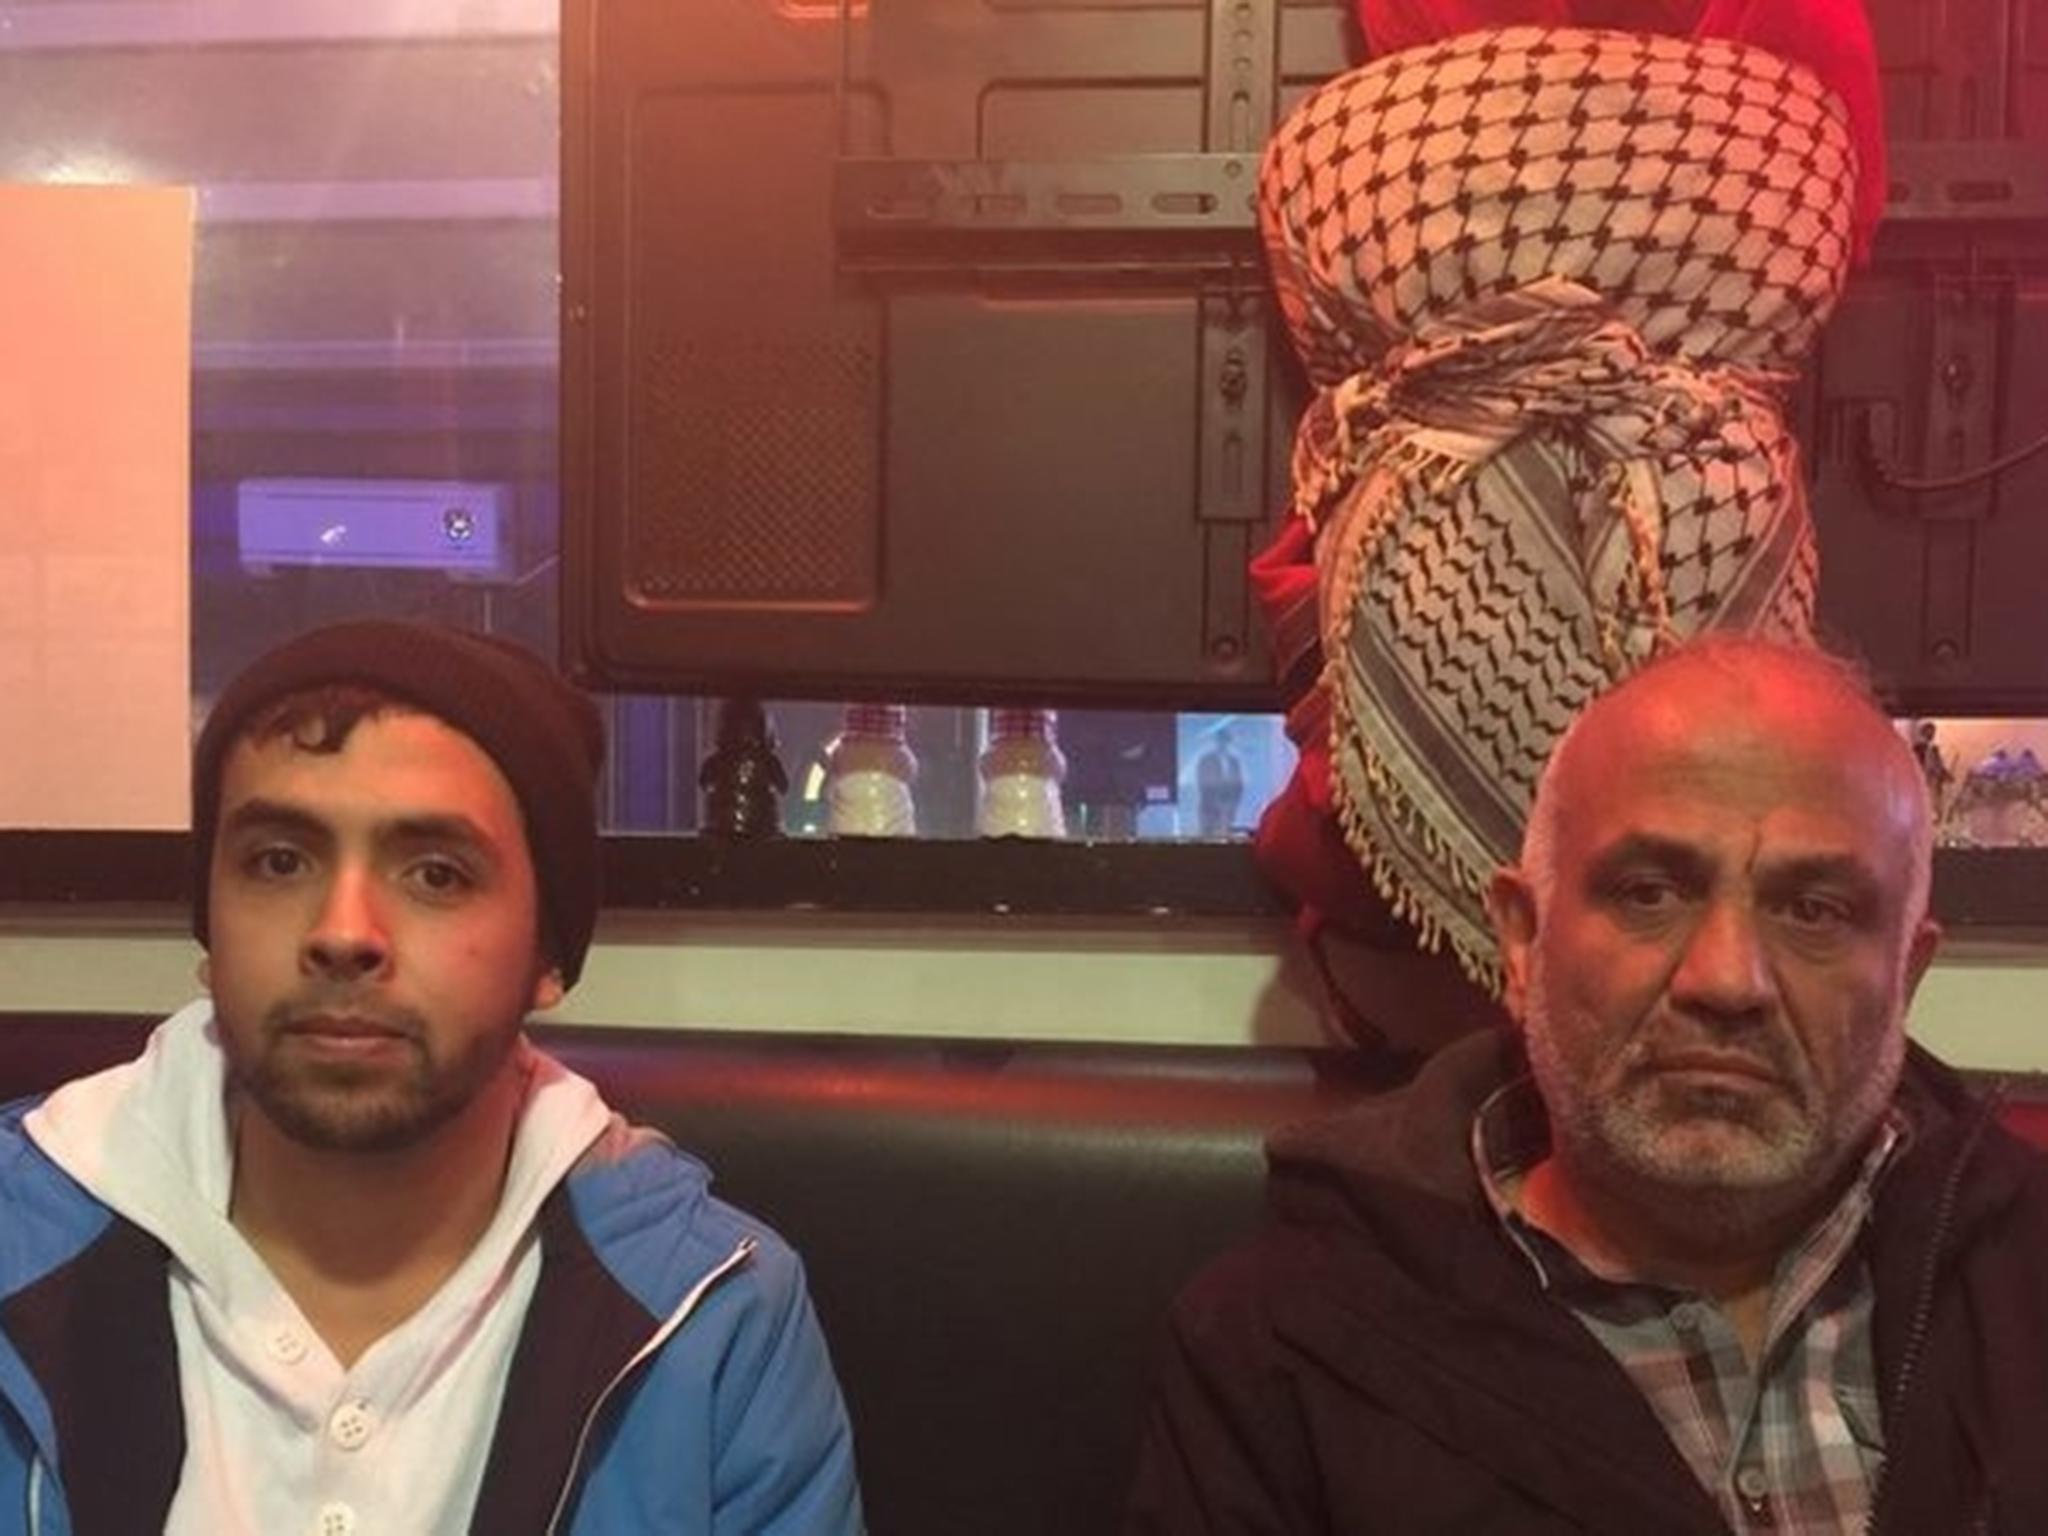 Yousef Hassan, 22, left, and his father Jehad, 52